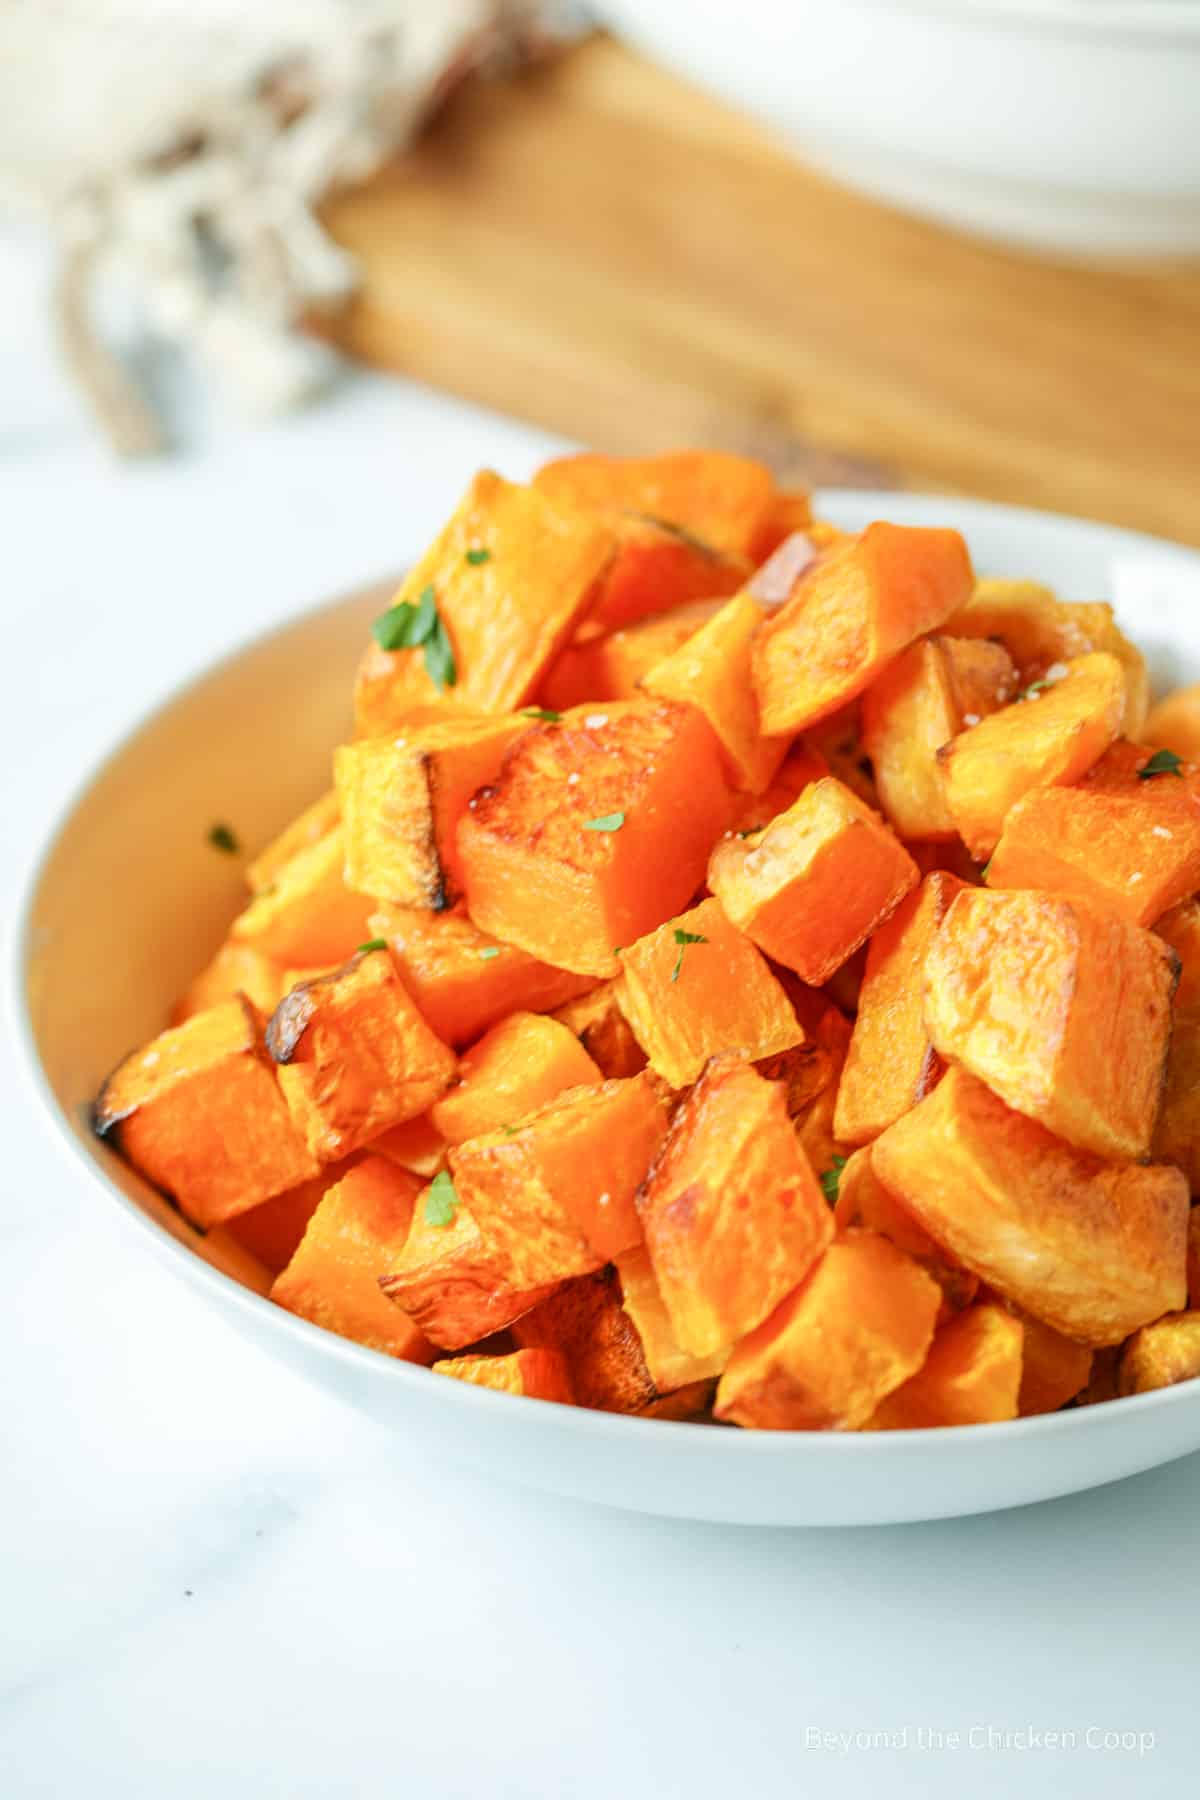 Cubed squash in a bowl with a bit of parsley.